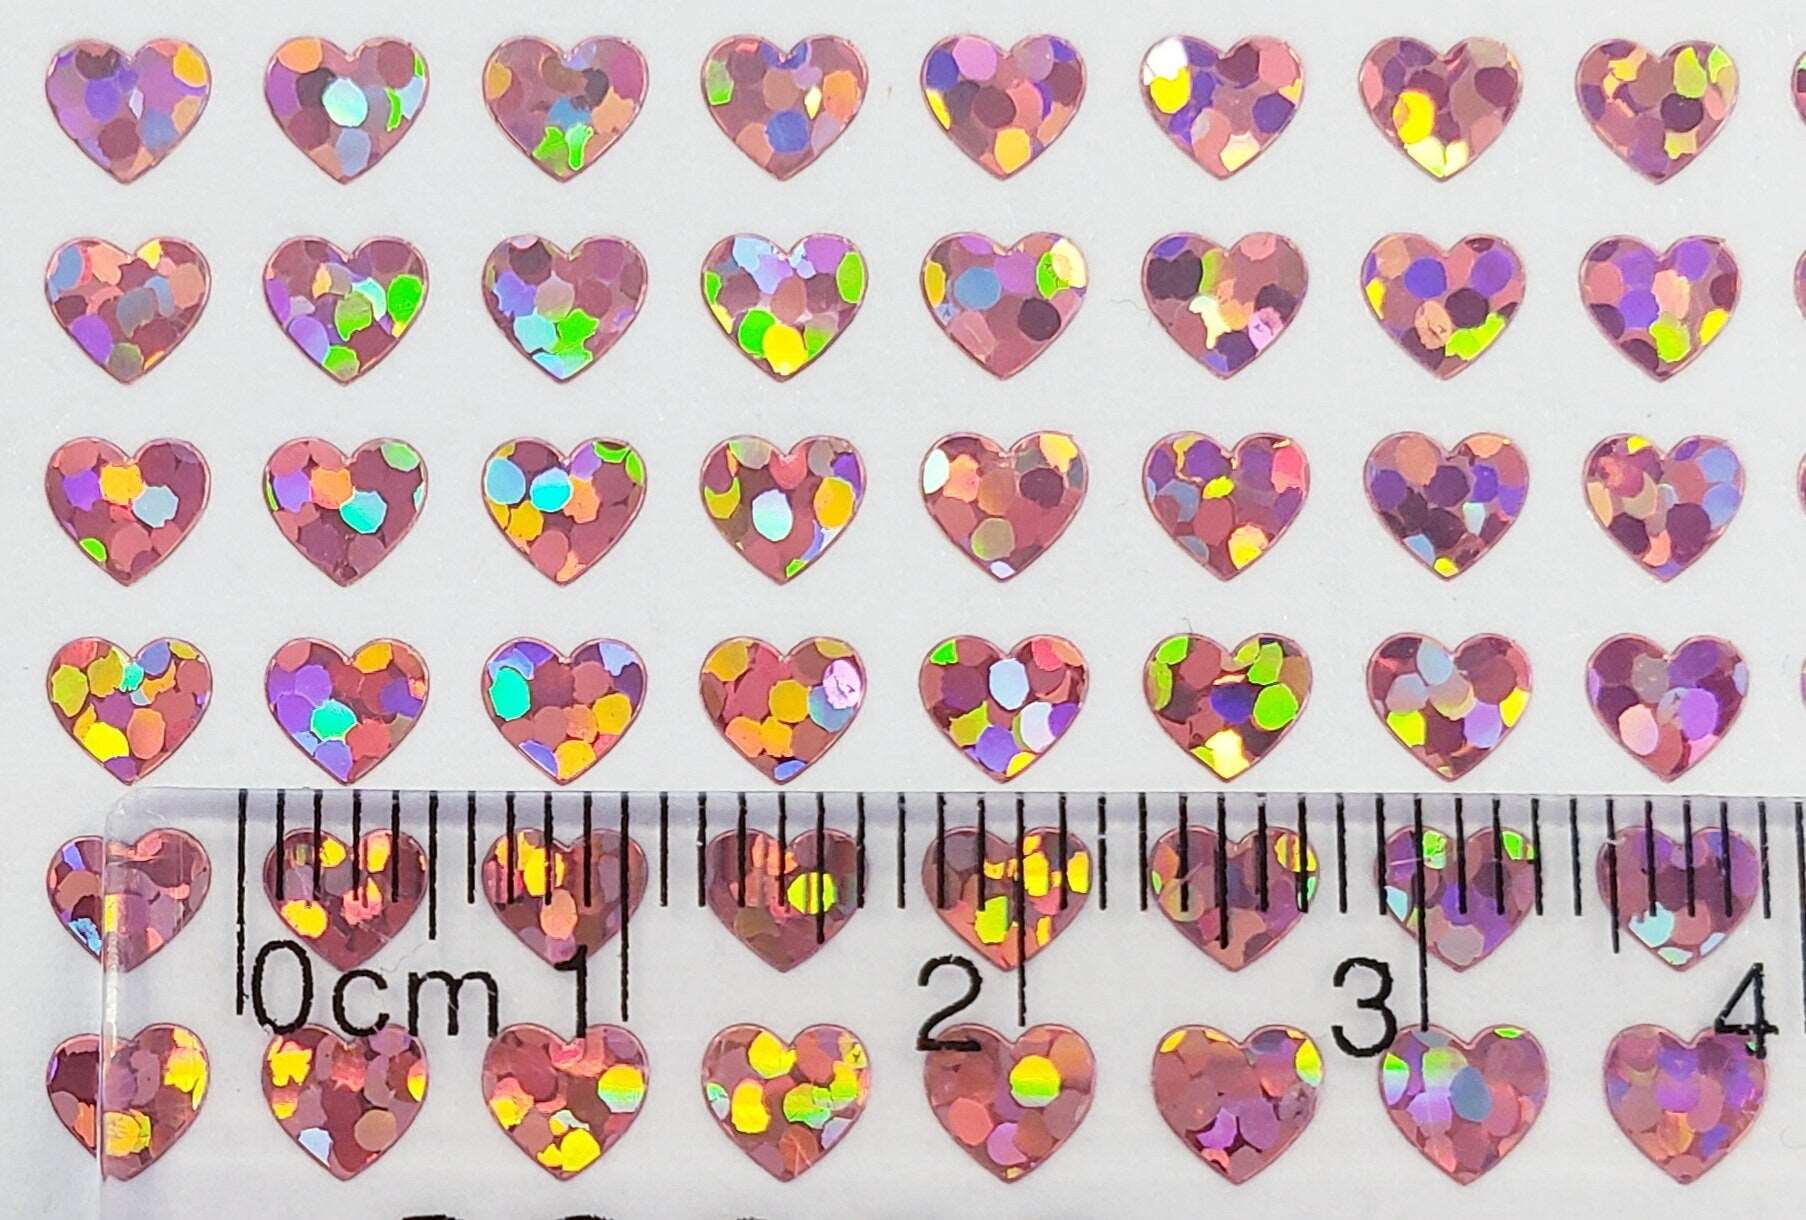 Pink Heart Stickers, set of 640 extra small pink glitter heart stickers for bullet journals, notebooks, nail art, toploader photocards